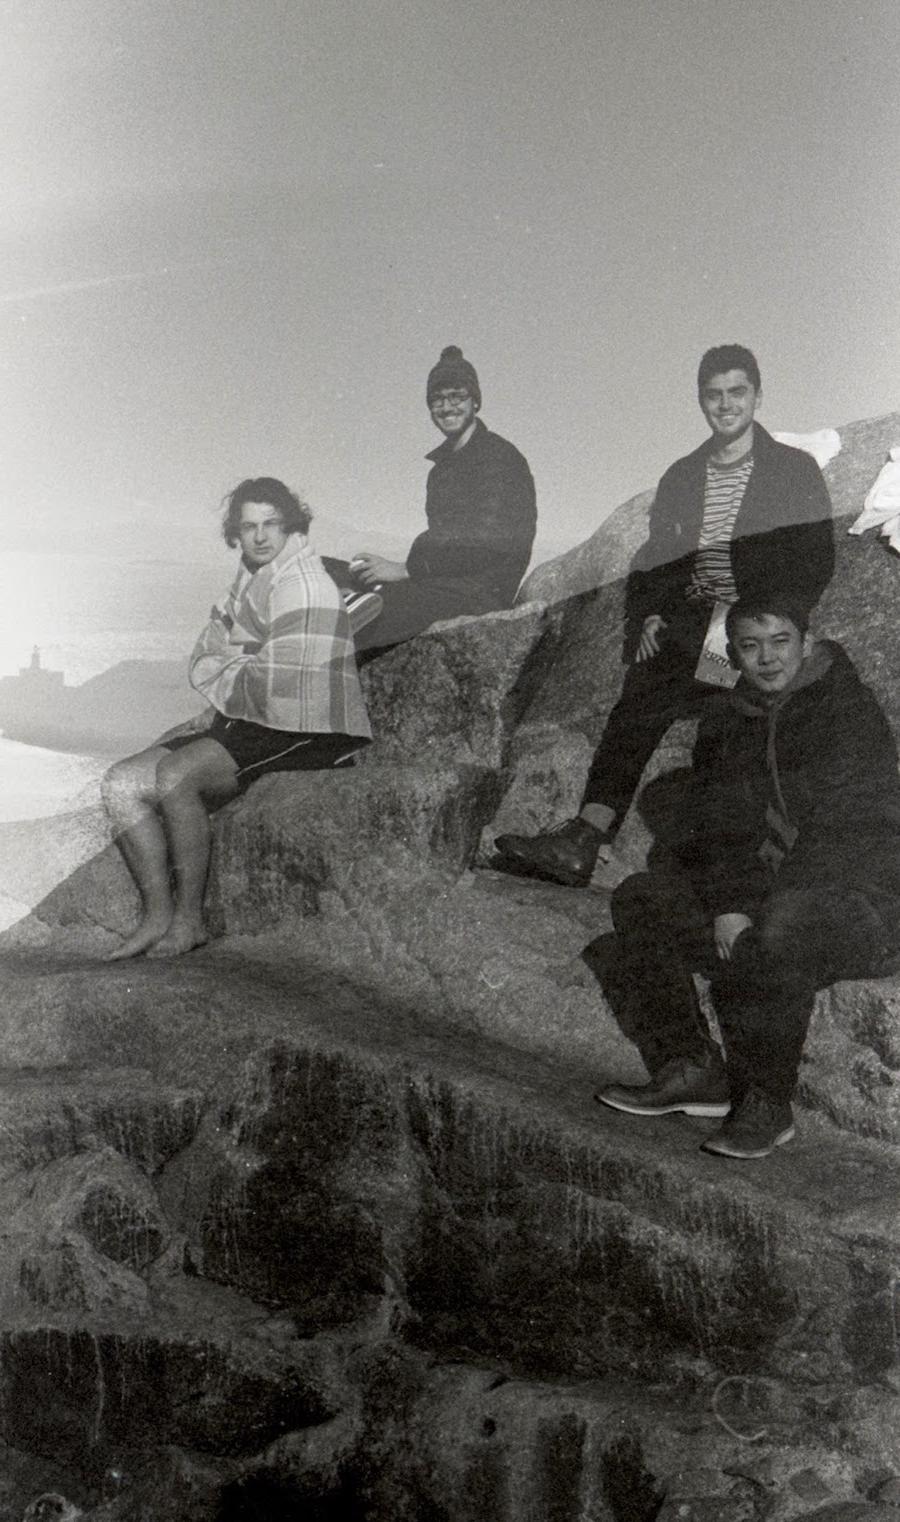 Students sitting on a rock after a swim